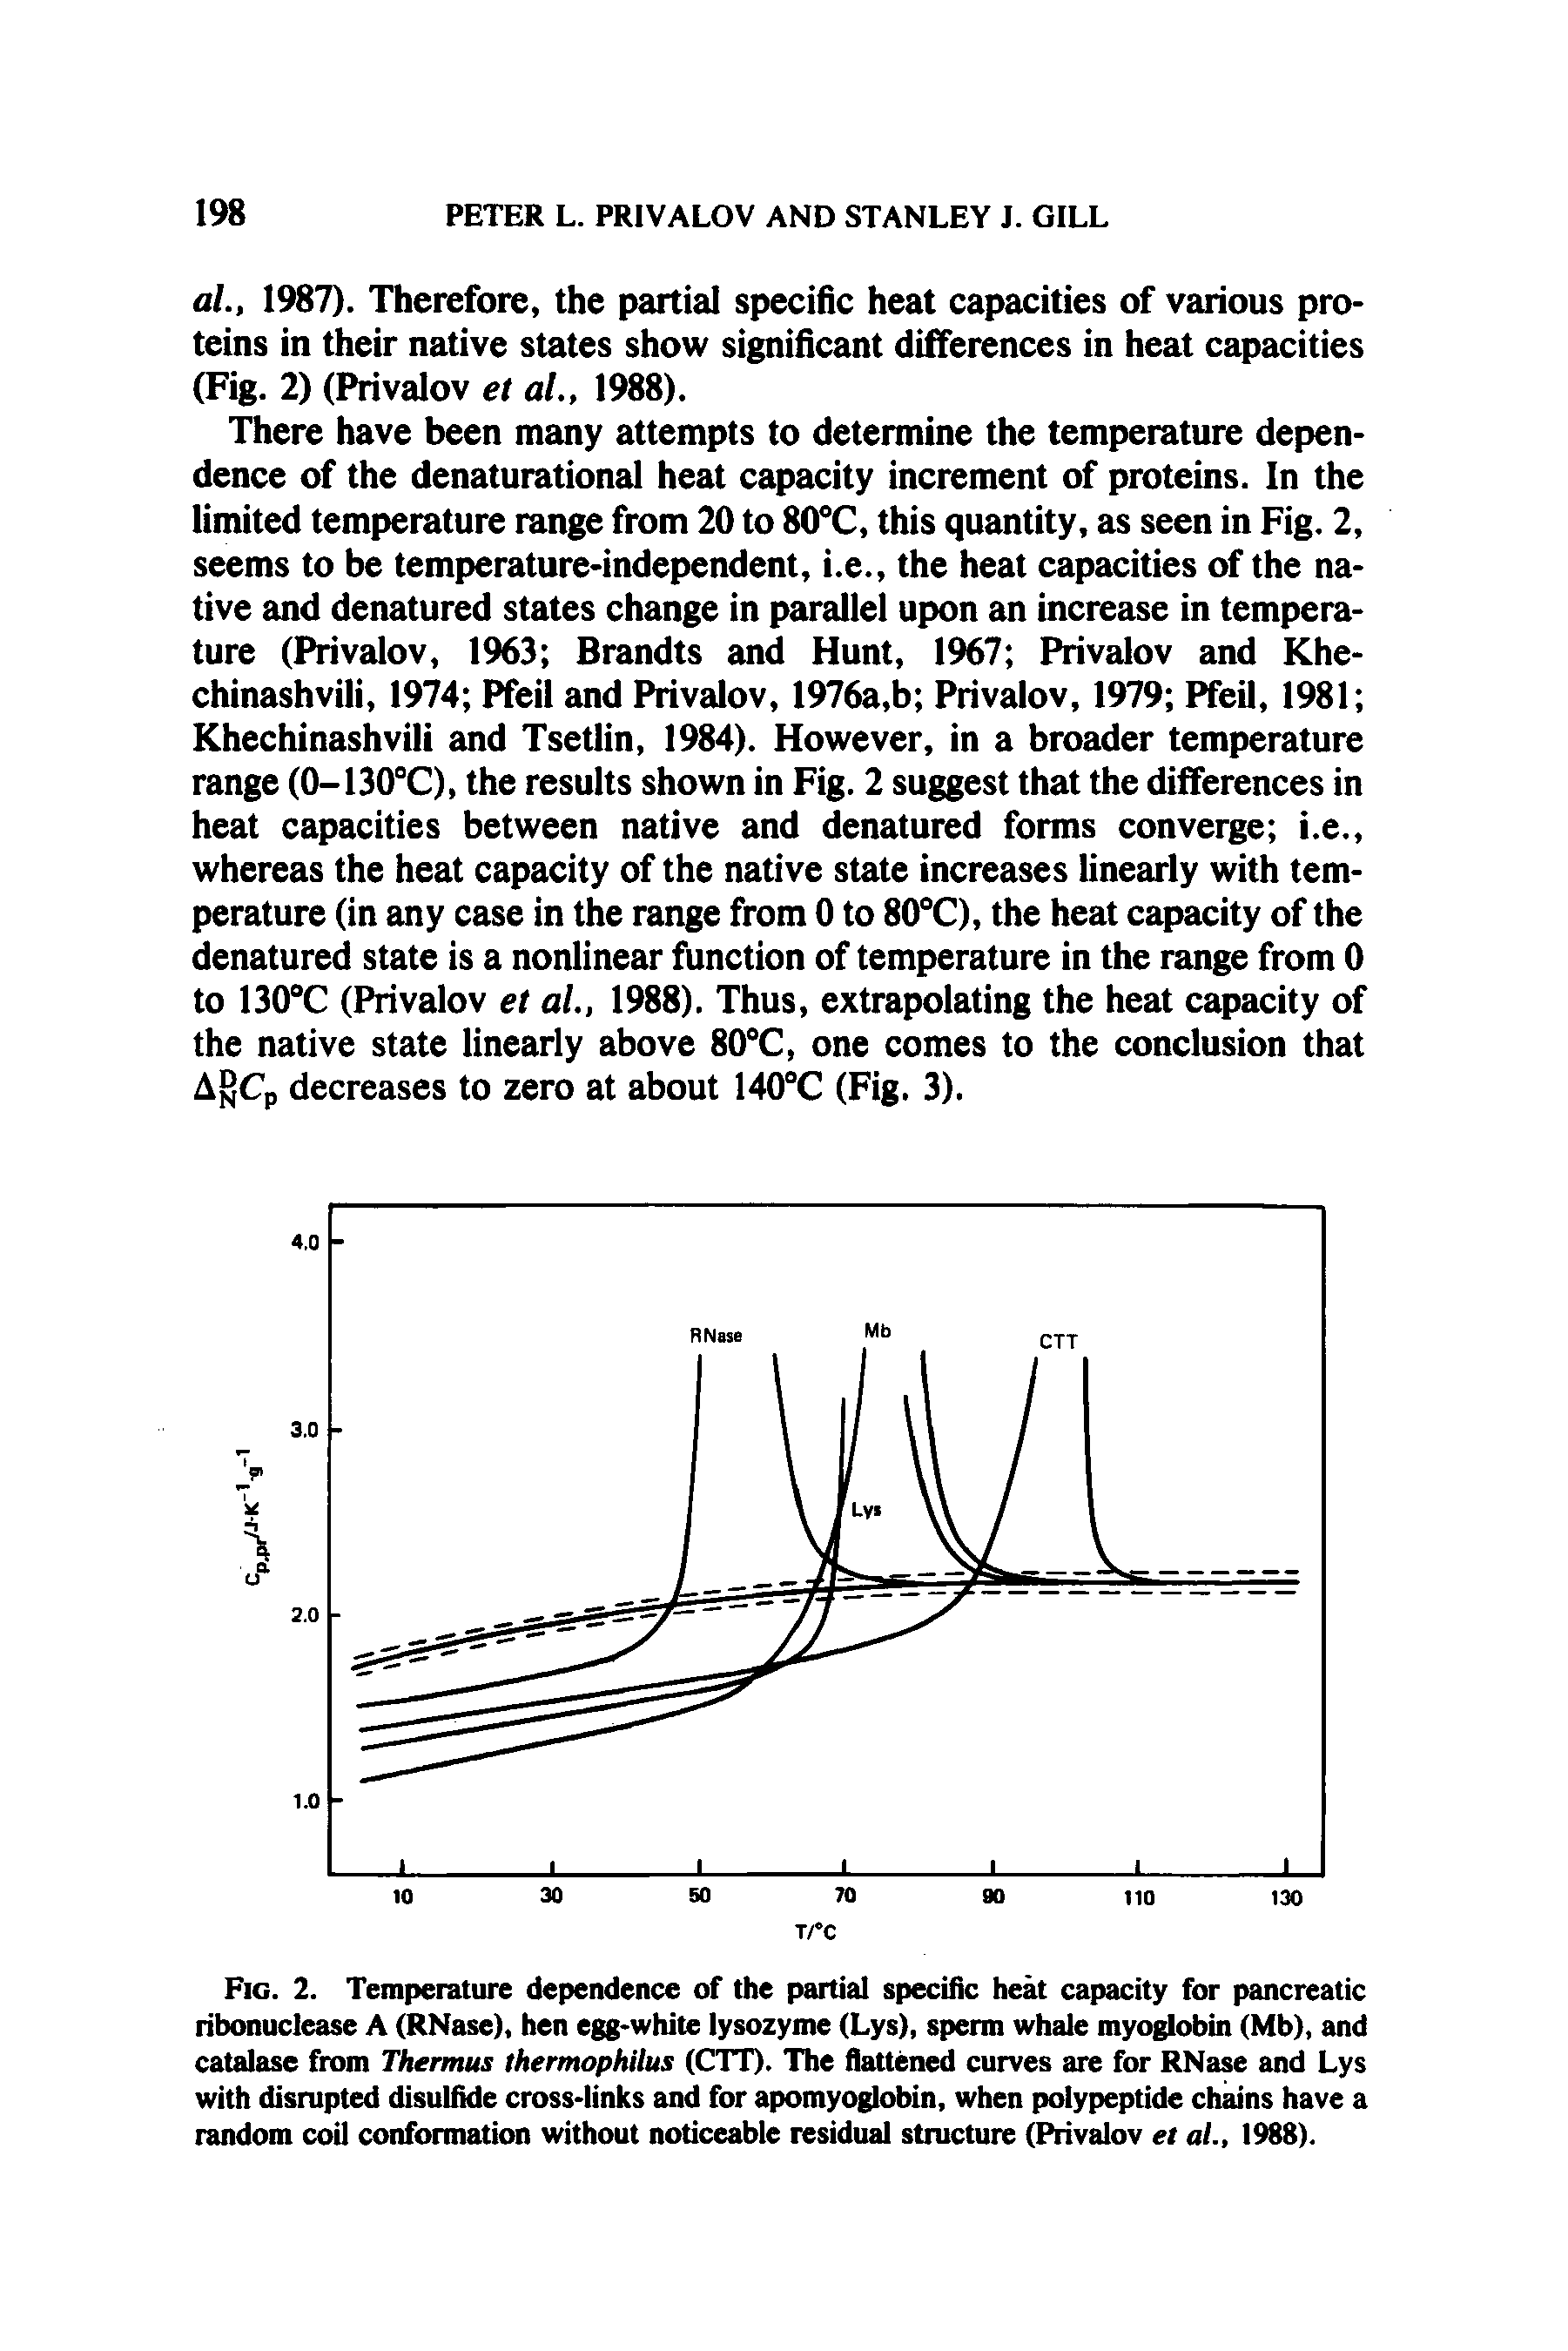 Fig. 2. Temperature dependence of the partial specific heat capacity for pancreatic ribonuclease A (RNase), hen egg-white lysozyme (Lys), sperm whale myoglobin (Mb), and catalase from Thermus thermophilus (CTT). The flattened curves are for RNase and Lys with disrupted disulfide cross-links and for apomyoglobin, when polypeptide chains have a random coil conformation without noticeable residual structure (Privalov et al., 1988).